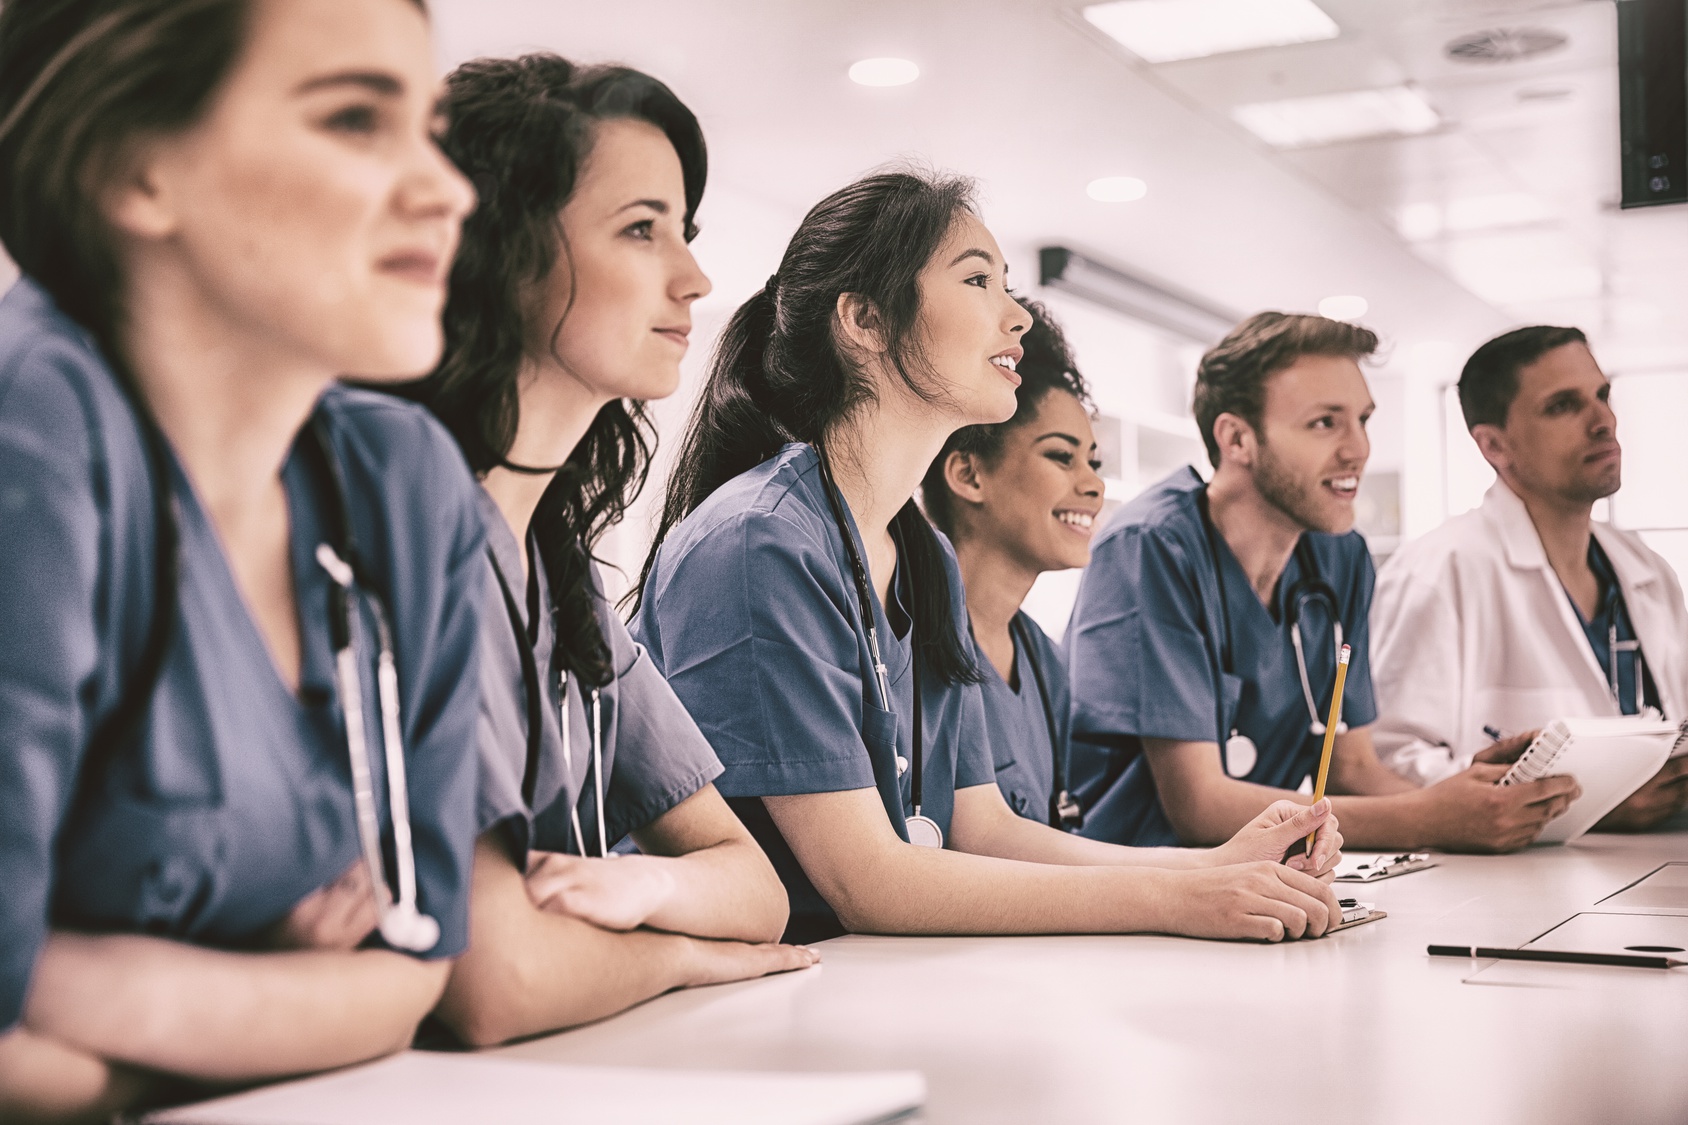 What’s Changing in Modern Healthcare Education